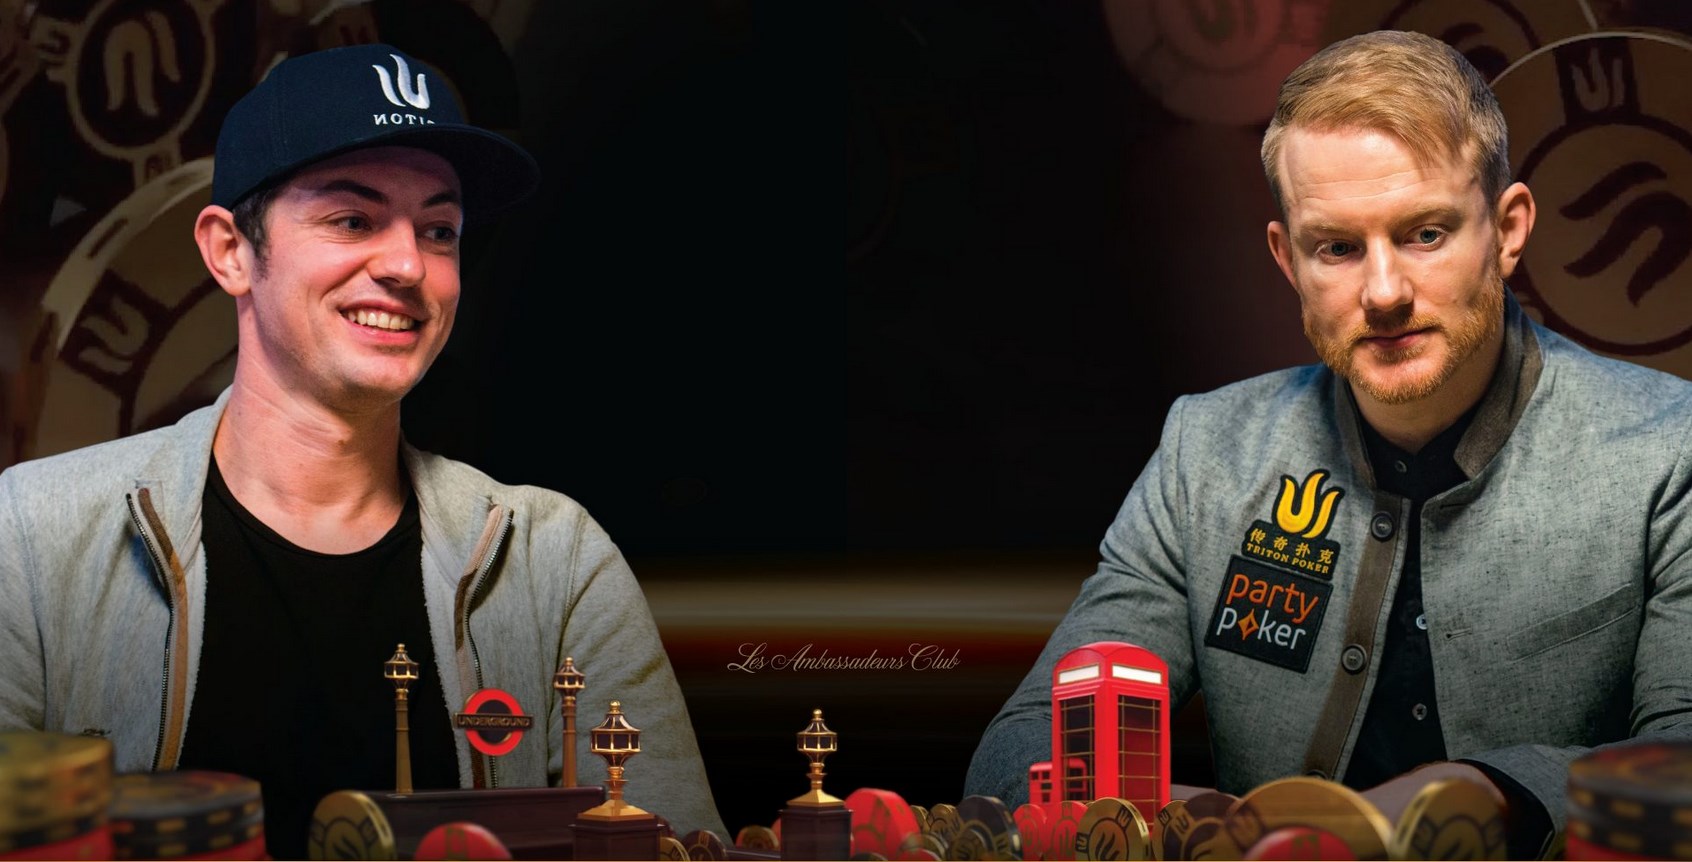 The roles of Asian poker series Triton Poker and Tom Dwan in popularizing the new format cannot be underestimated.